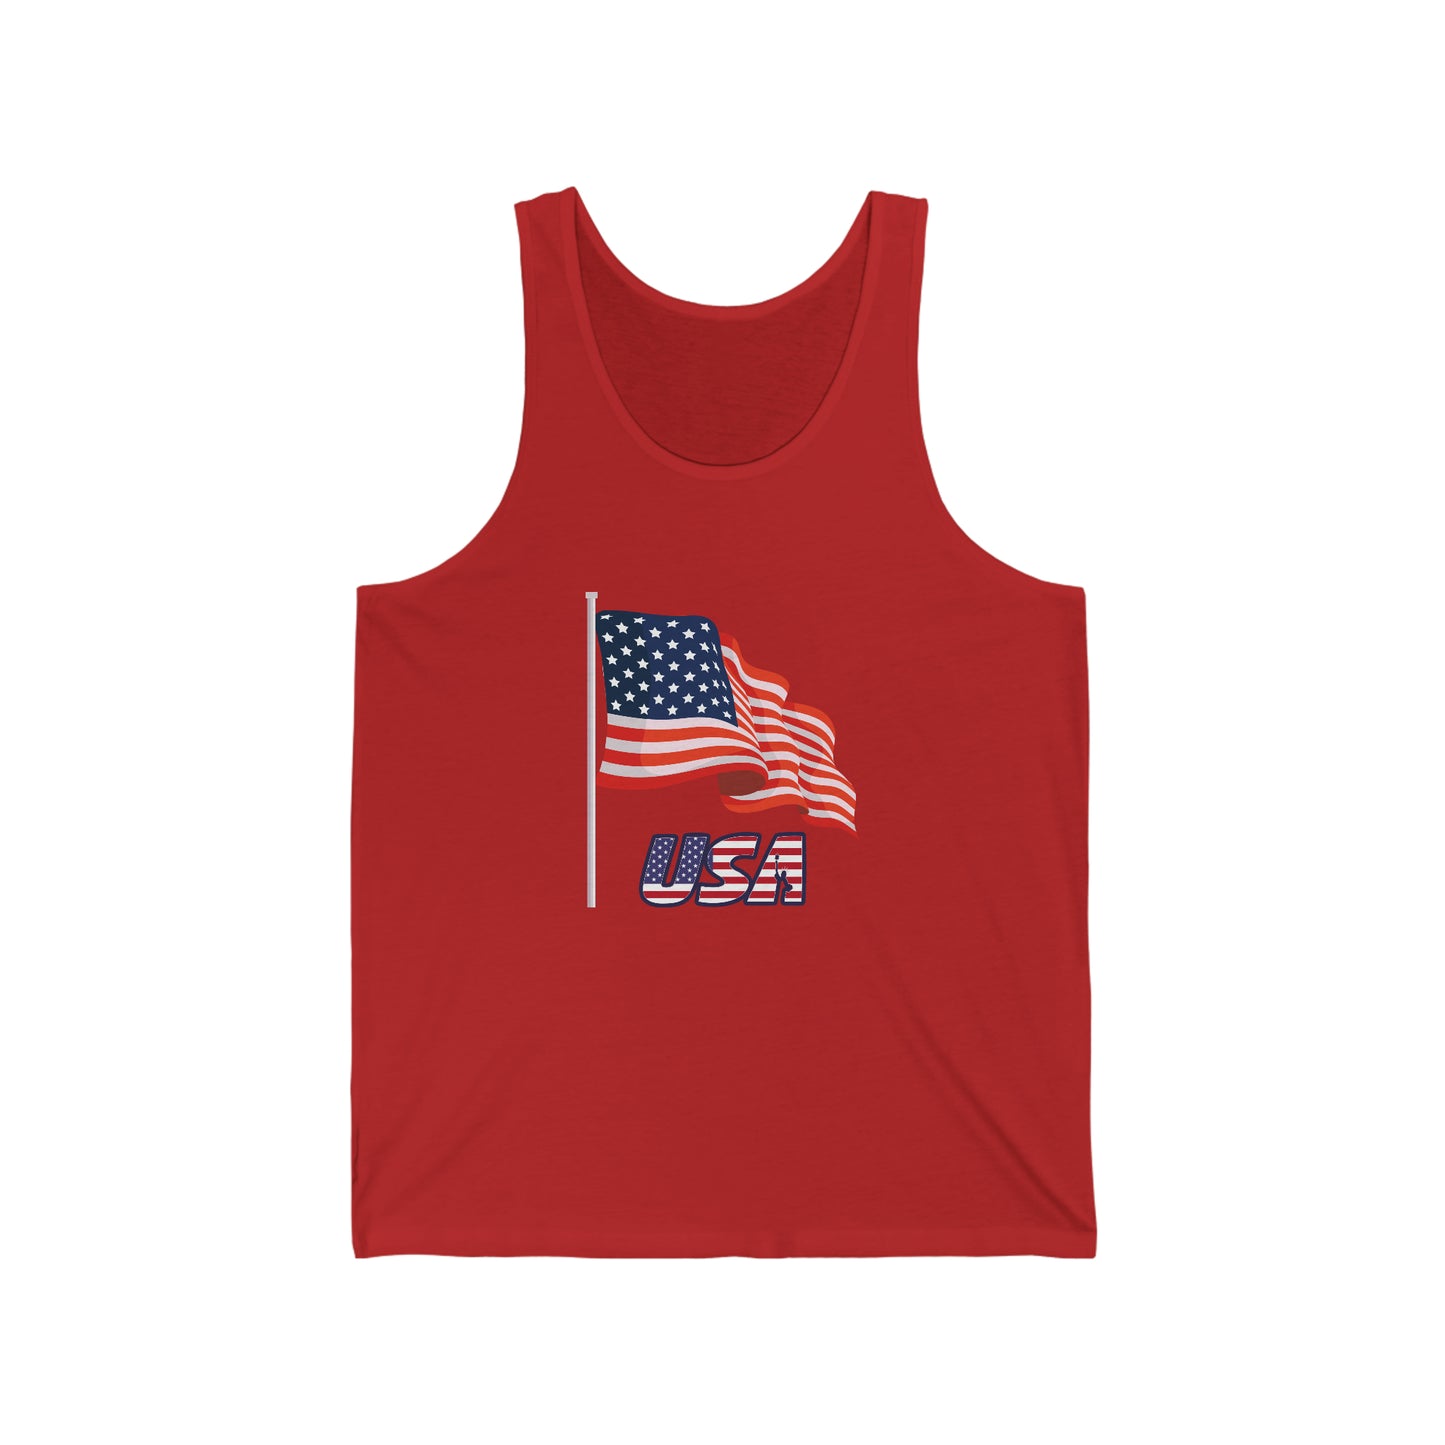 Unisex Jersey Tank, 4th of July Tank Top| Stars and Stripes Tees | Independence Day Tank Top | Freedom Tank Top | Patriotic Tank Top | Memorial Day Tank Top